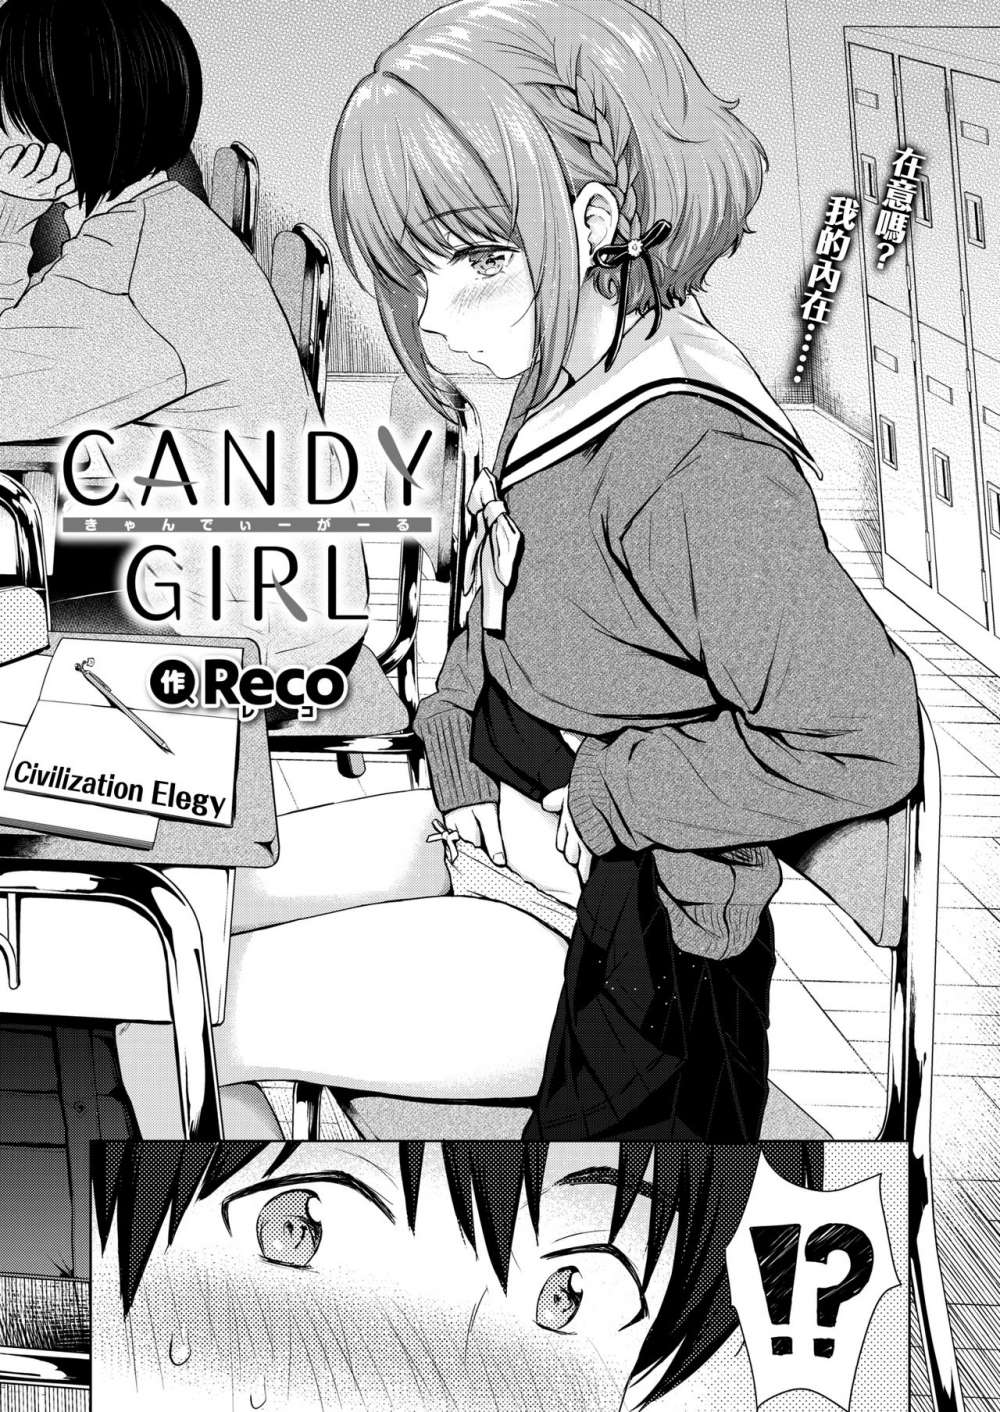 CANDY GIRL 0